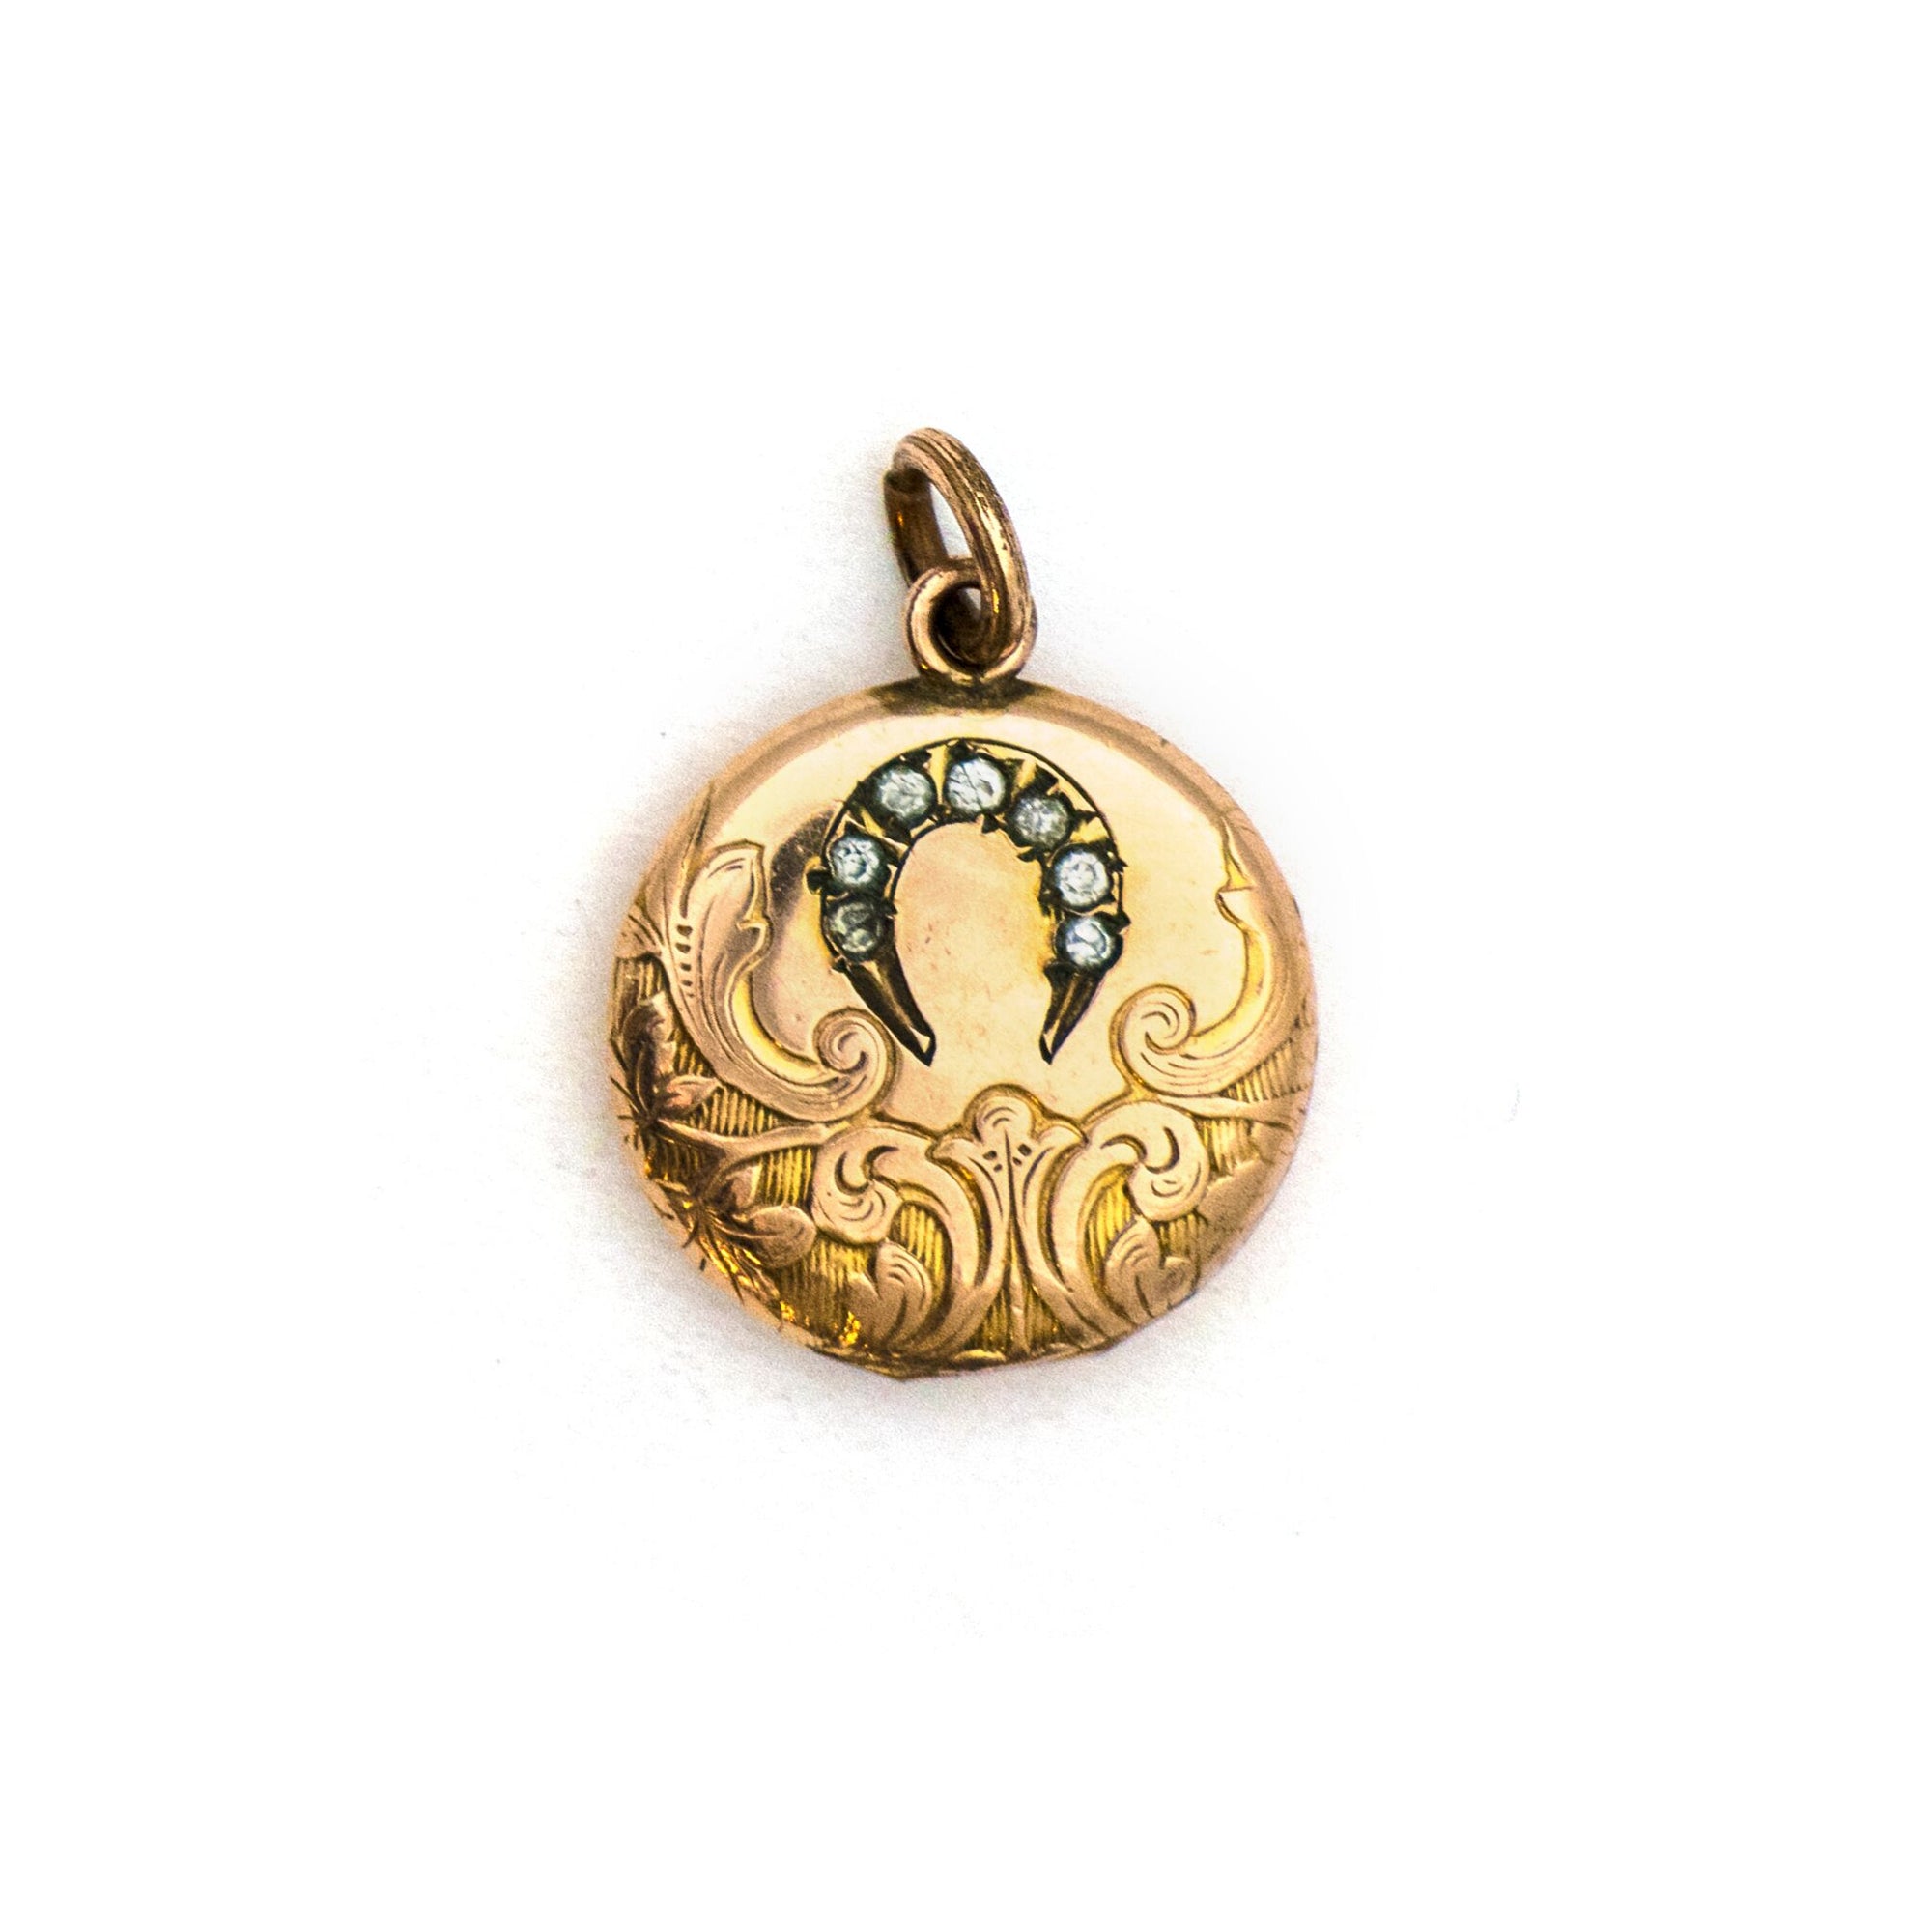 Petite Horseshoe Antique Locket, Antique good luck charm locket, gold fill with paste stones in horseshoe, front view